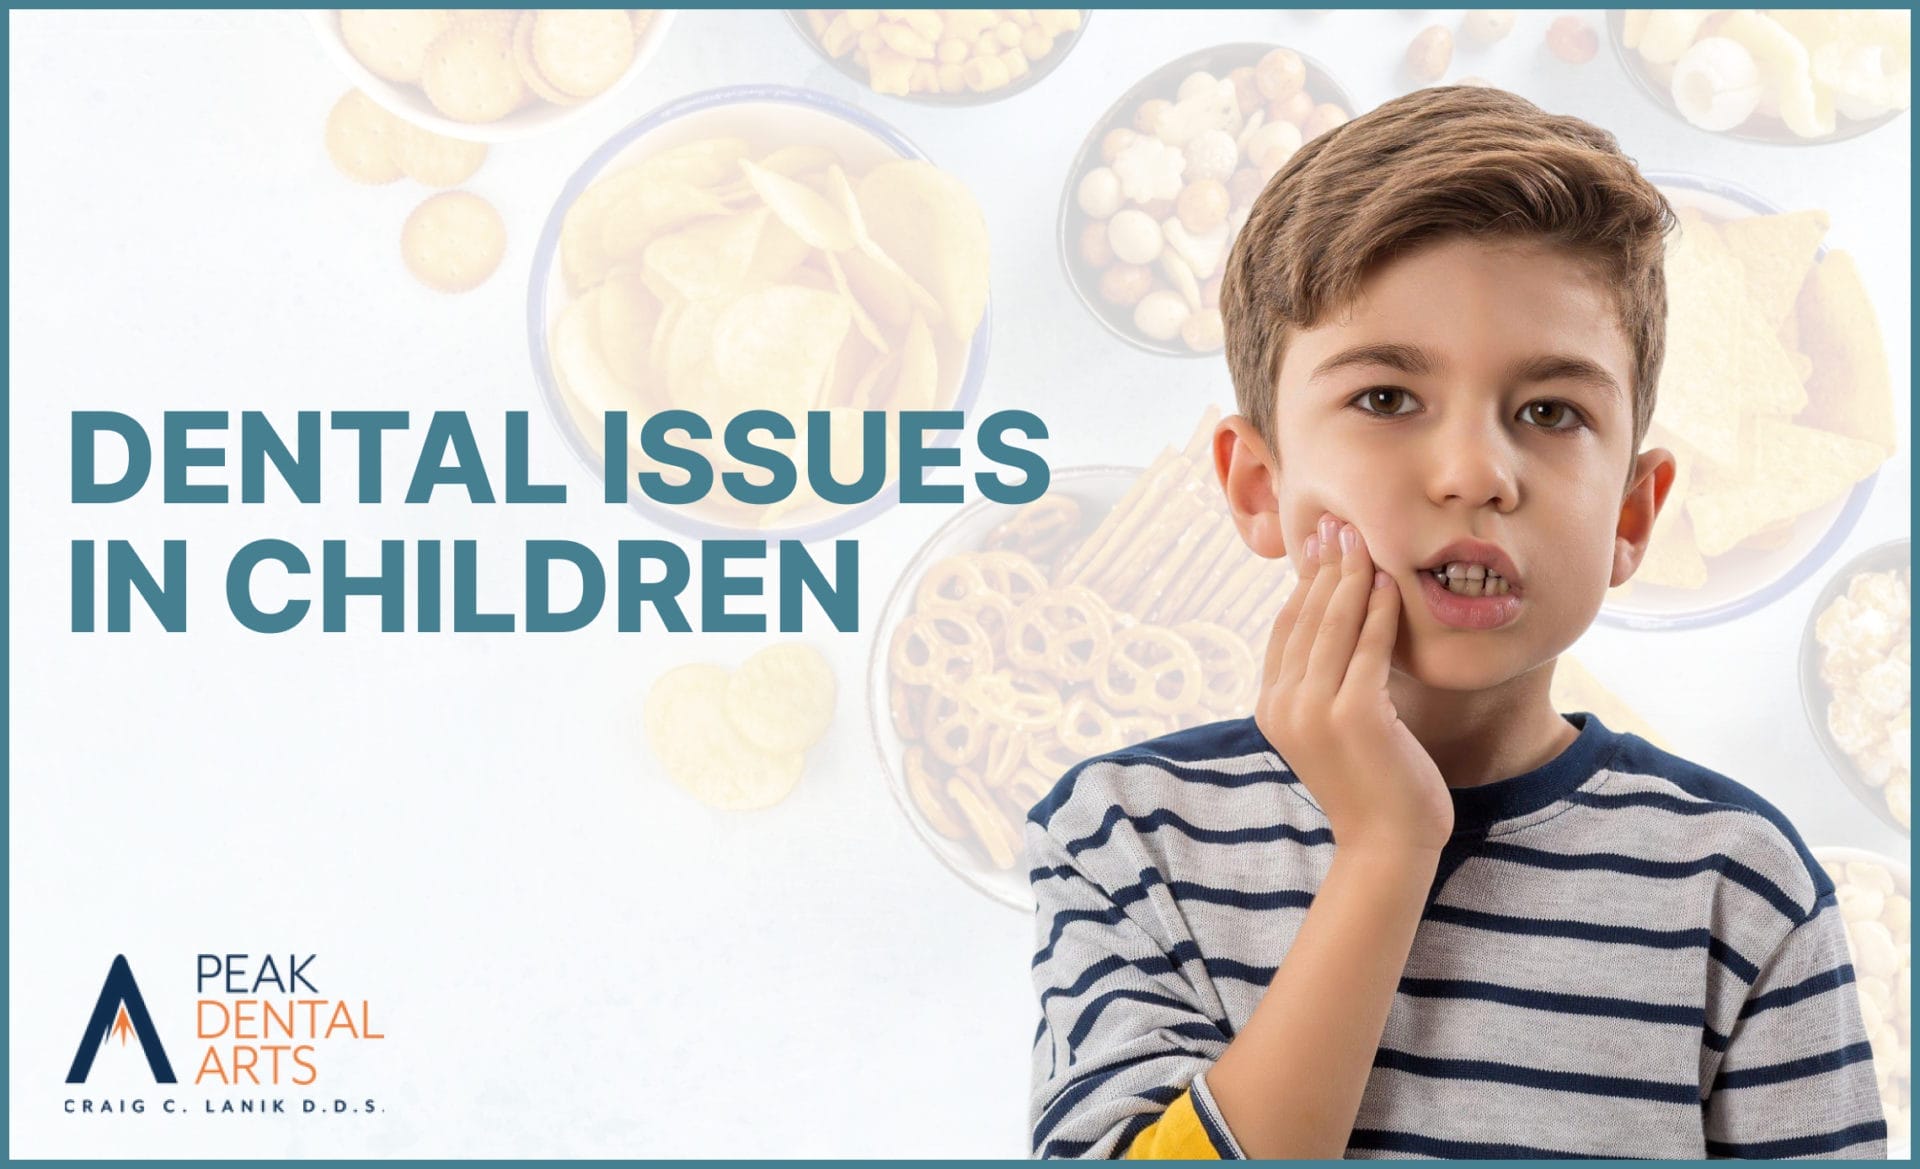 male child having touching his jaw for having a tooth ache with junk foods background. image text: Dental Issues in Children.